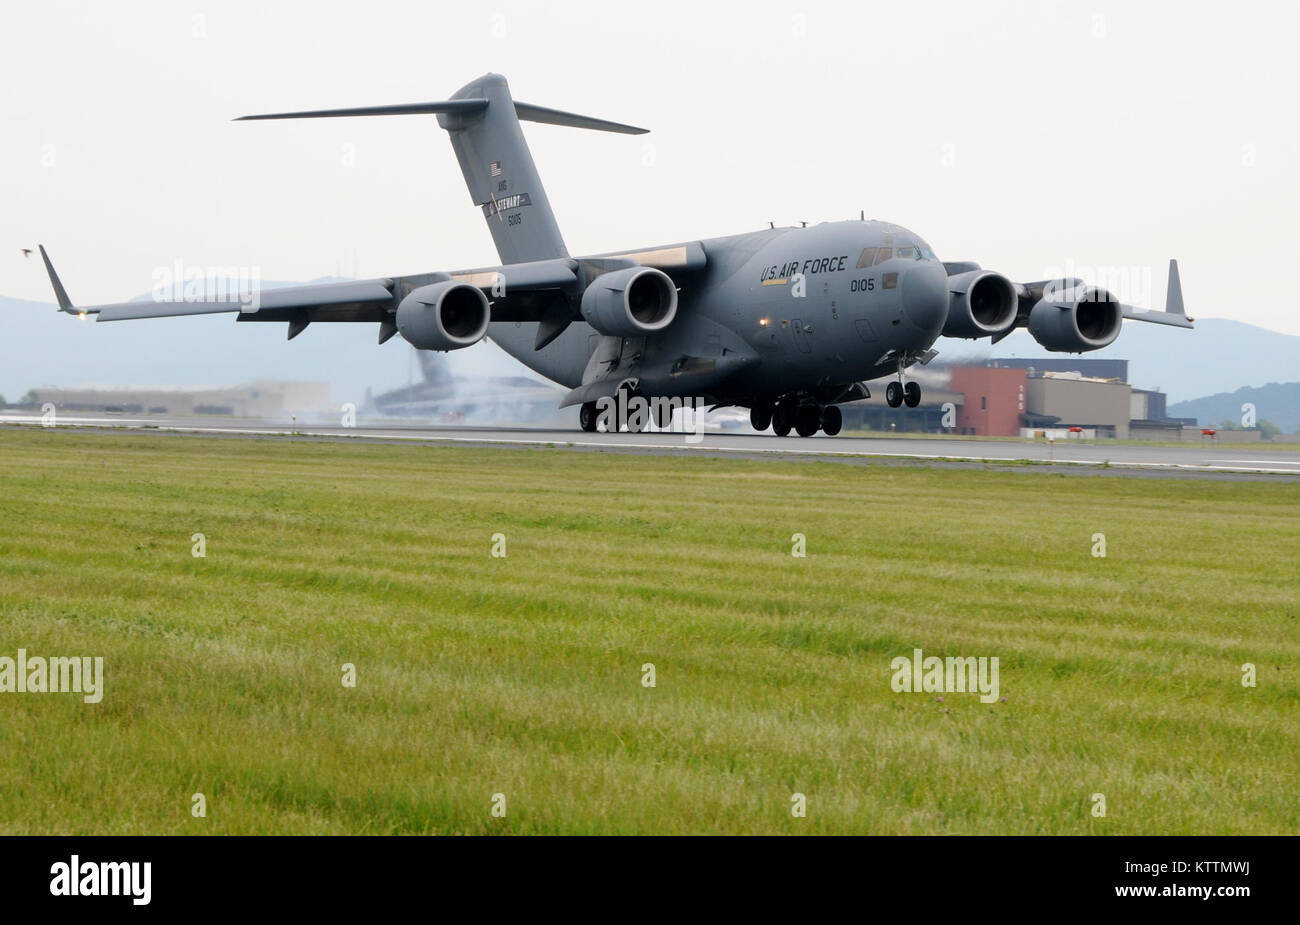 STERWART ANGB, N.Y. - The first C-17 Globemaster III, tail 5105, assigned to the 105th Airlift Wing touches down on Stewart International Airport's runway on July 18, 2011. (U.S. Air Force Photo by Tech. Sgt. Michael OHalloran) (Released) Stock Photo